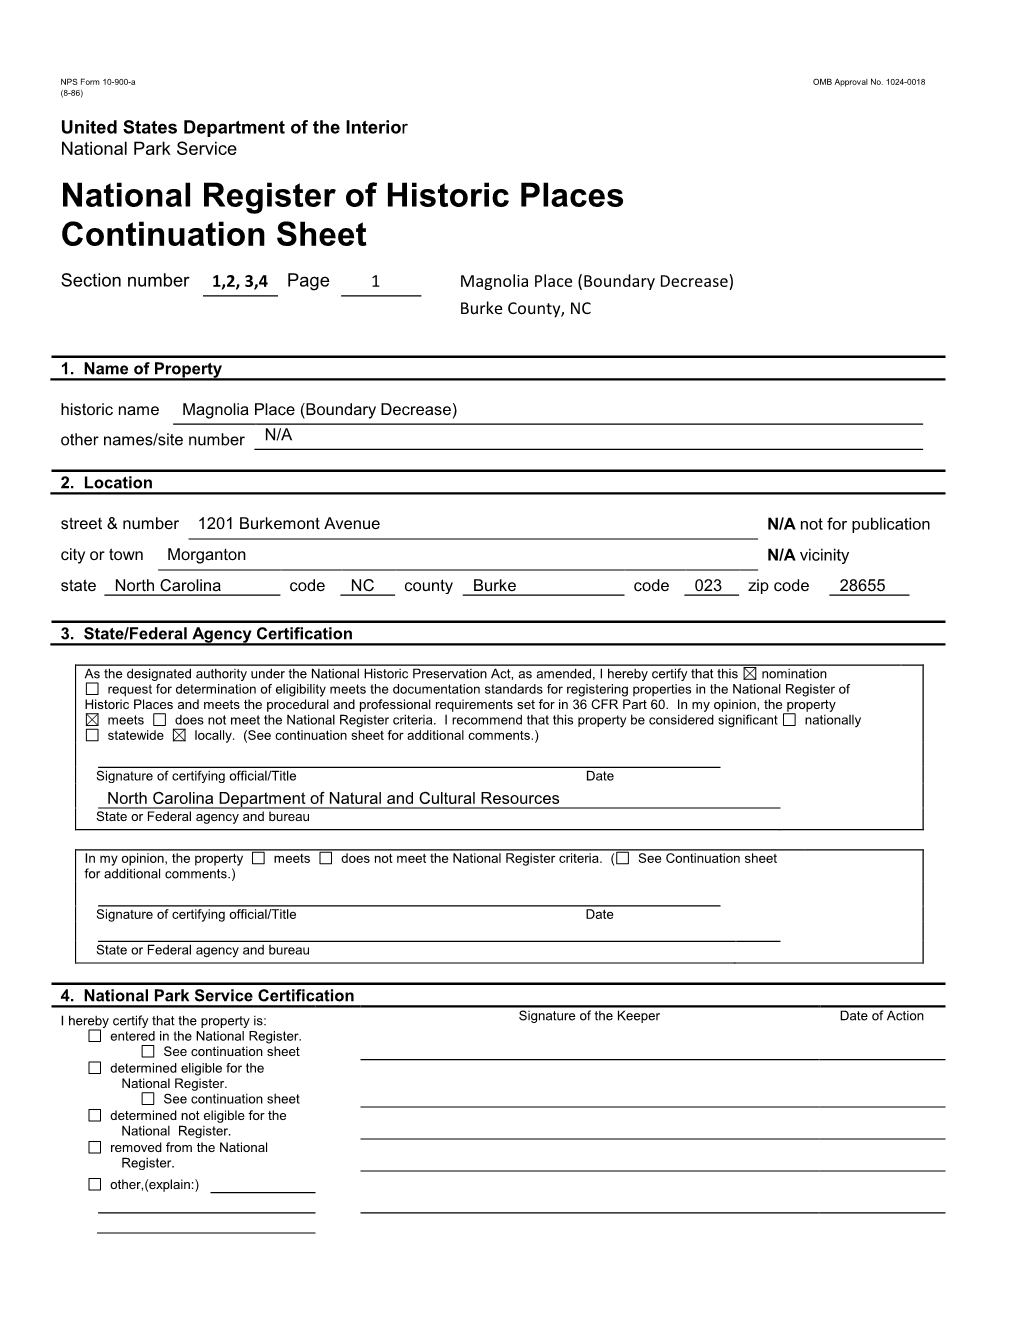 National Register of Historic Places Continuation Sheet Section Number 1,2, 3,4 Page 1 Magnolia Place (Boundary Decrease) Burke County, NC